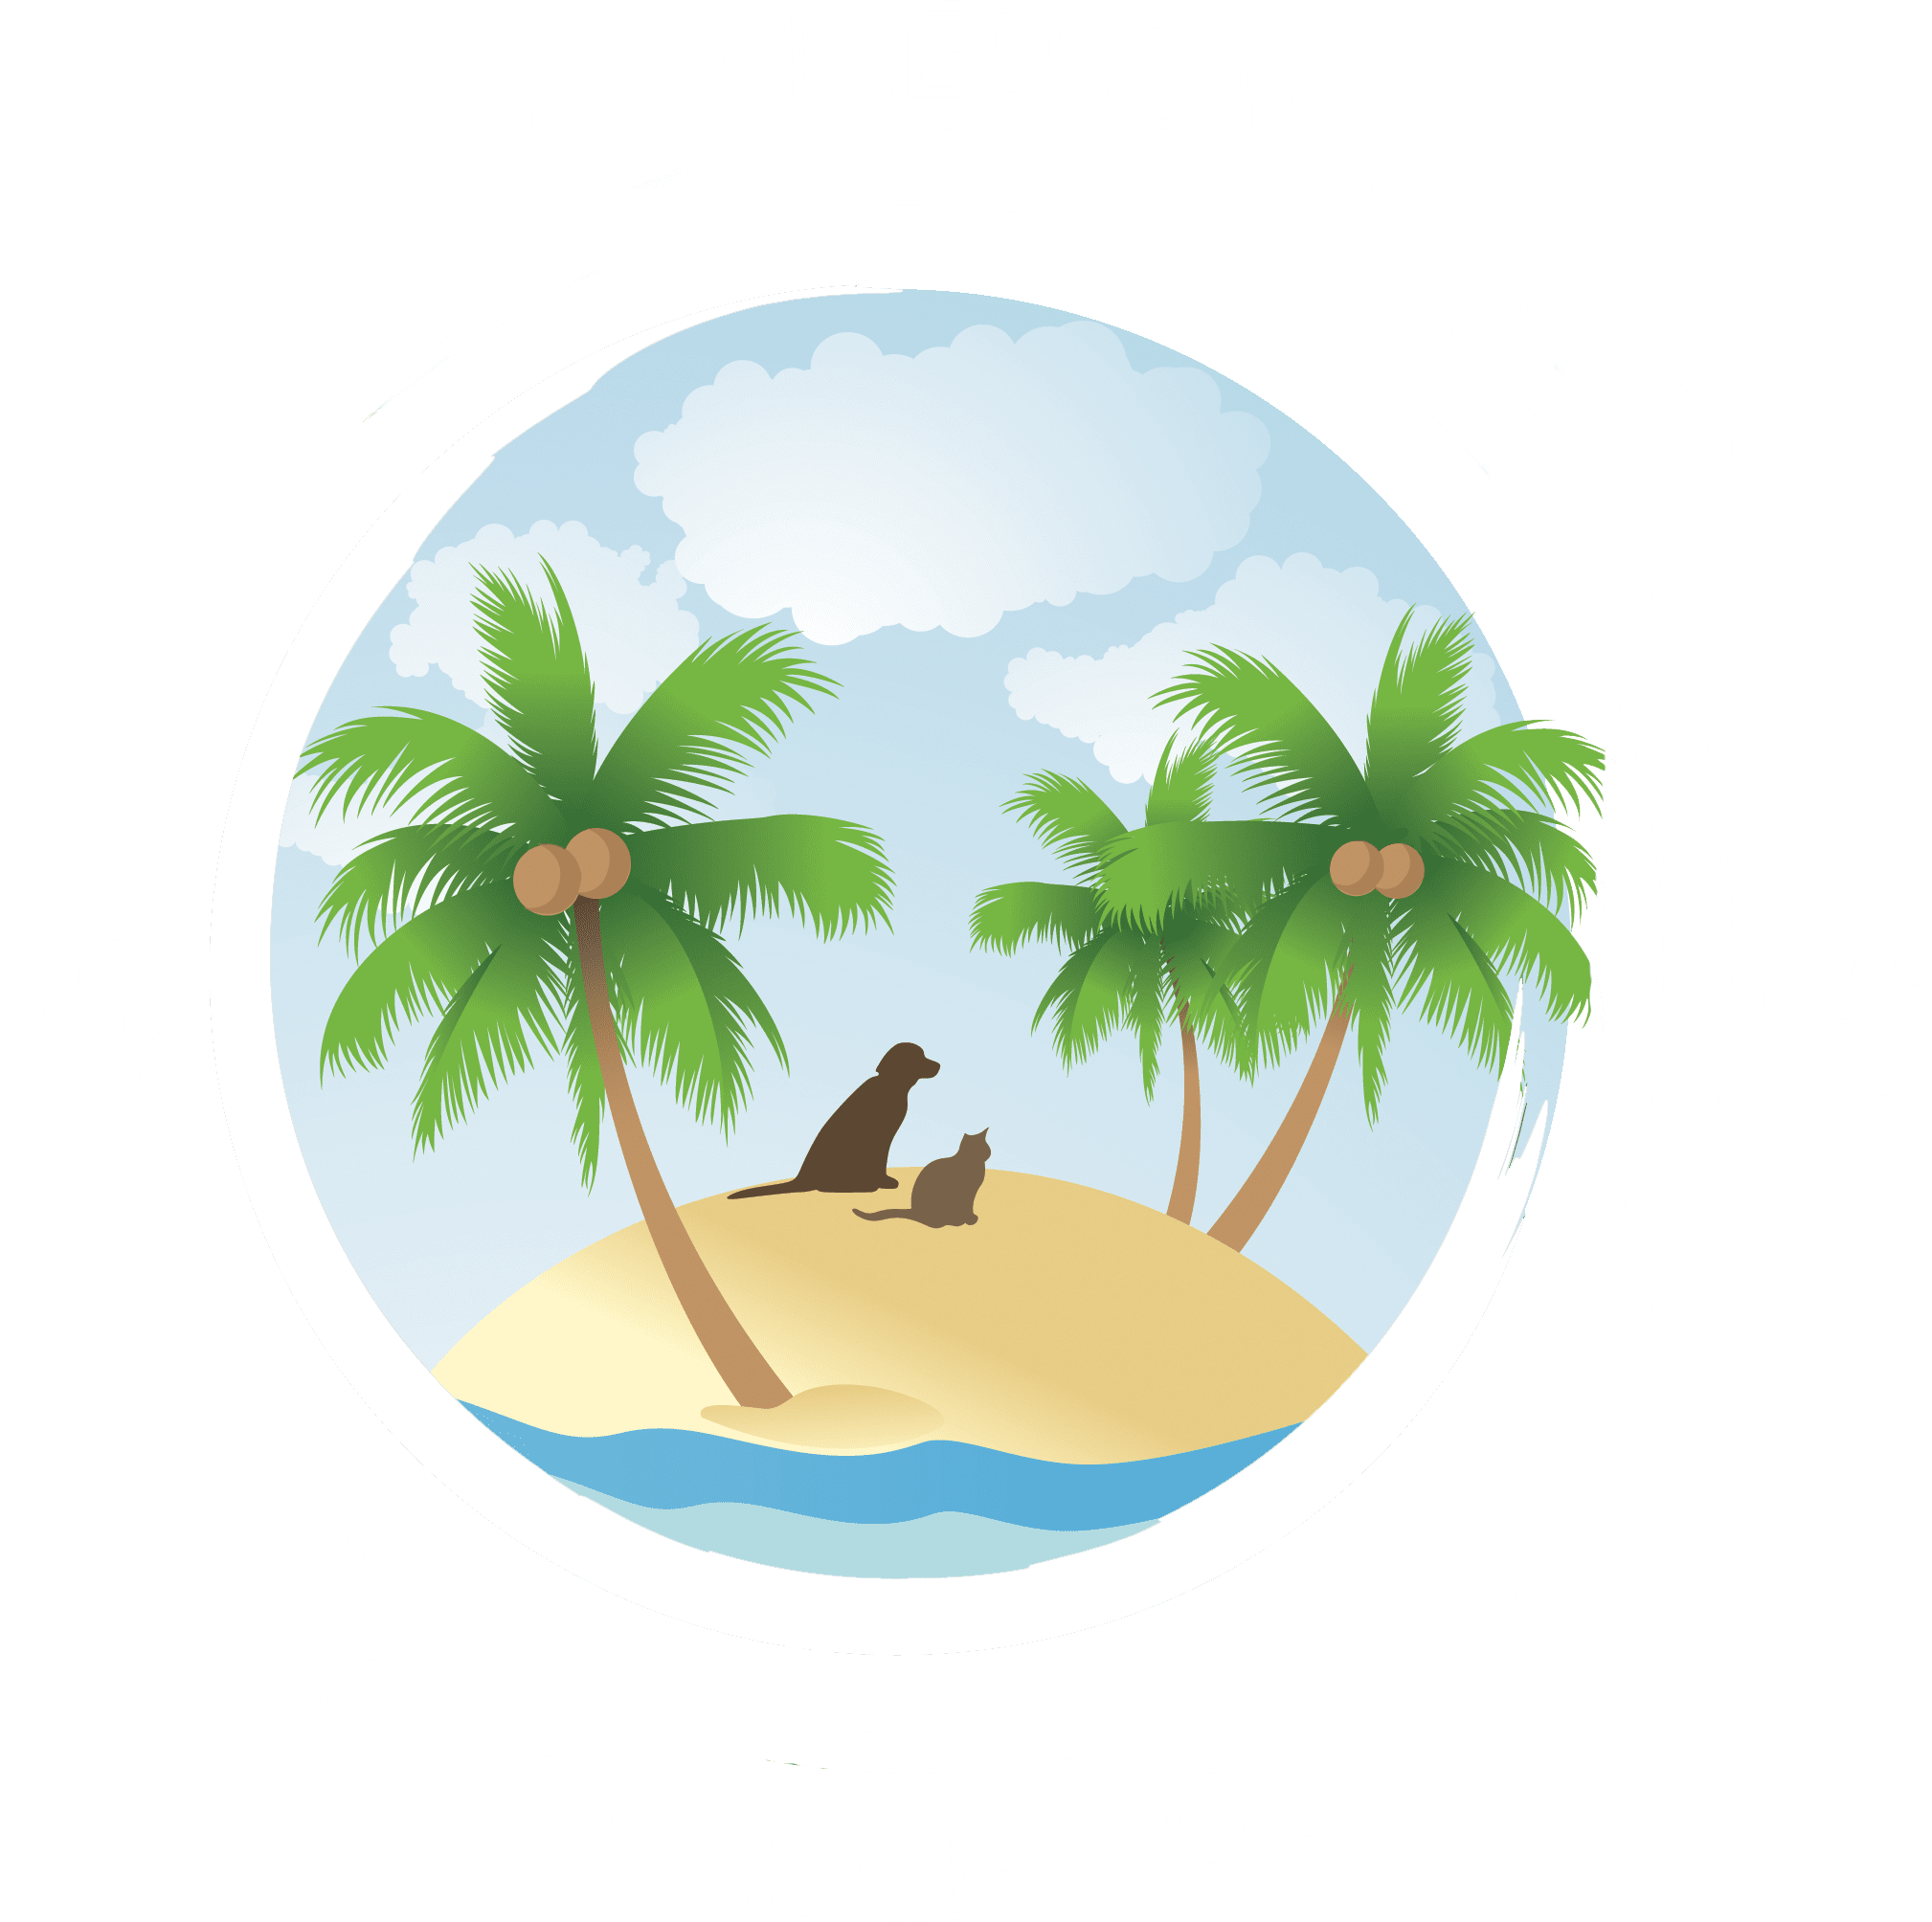 Veterinary Medical Center of St. Lucie County Logo